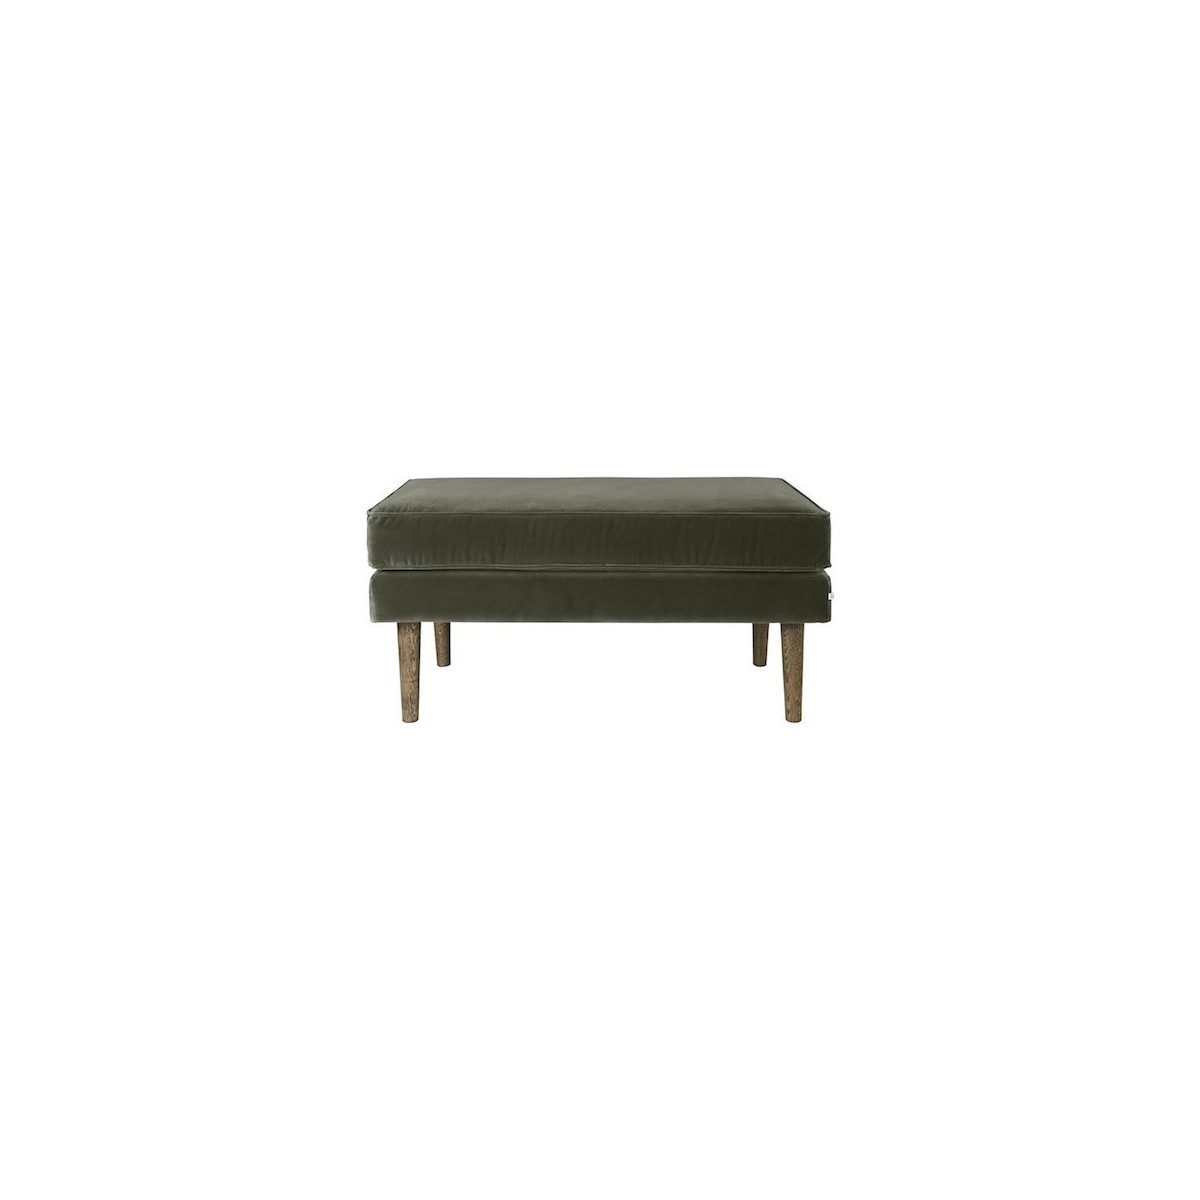 SOLD OUT - Grape leaf - Wind leg bench